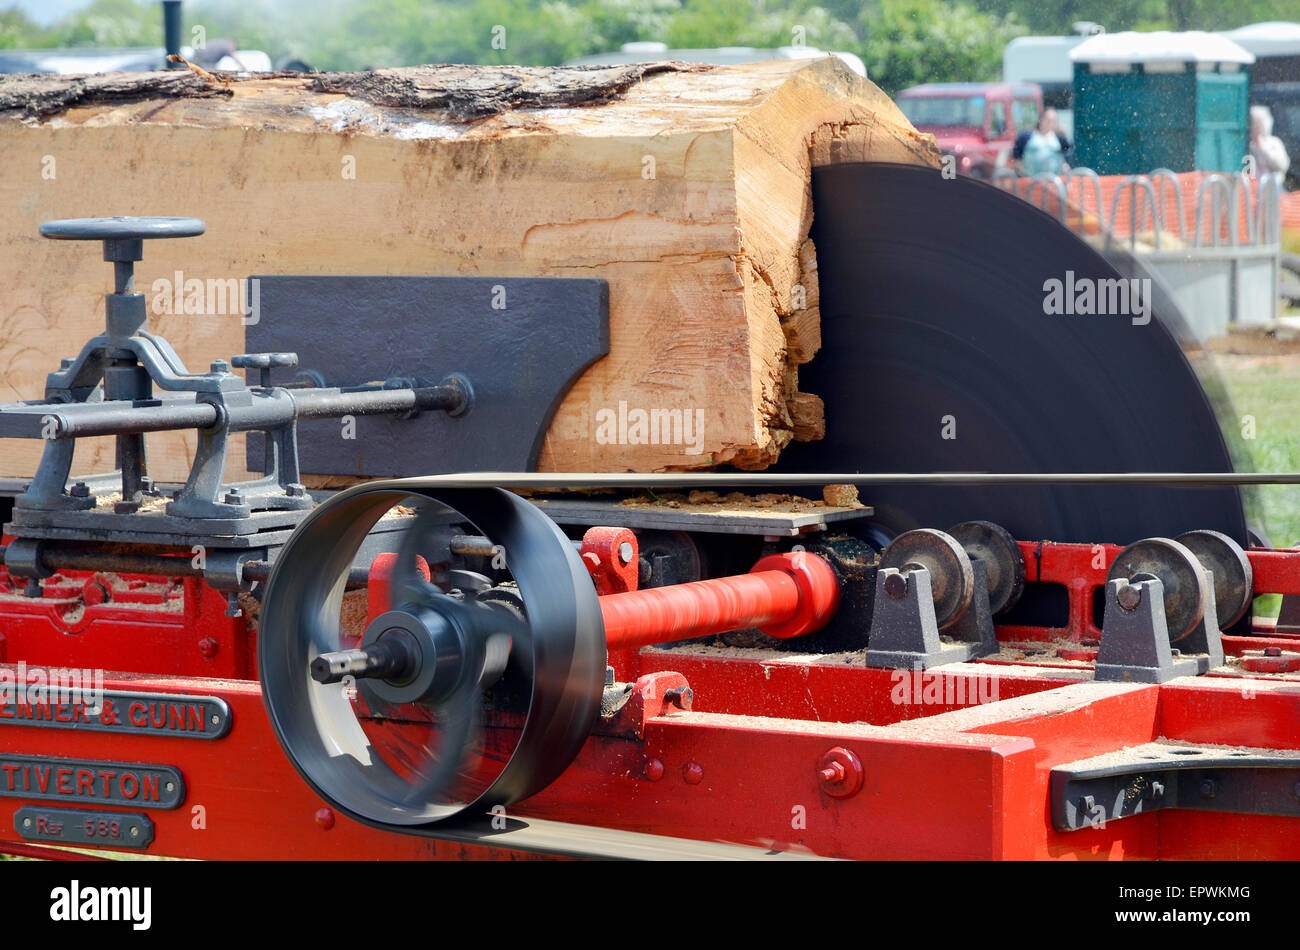 A large steam-powered circular saw cuts into a tree-trunk on a portable saw bench demonstrated at a country fair. Stock Photo